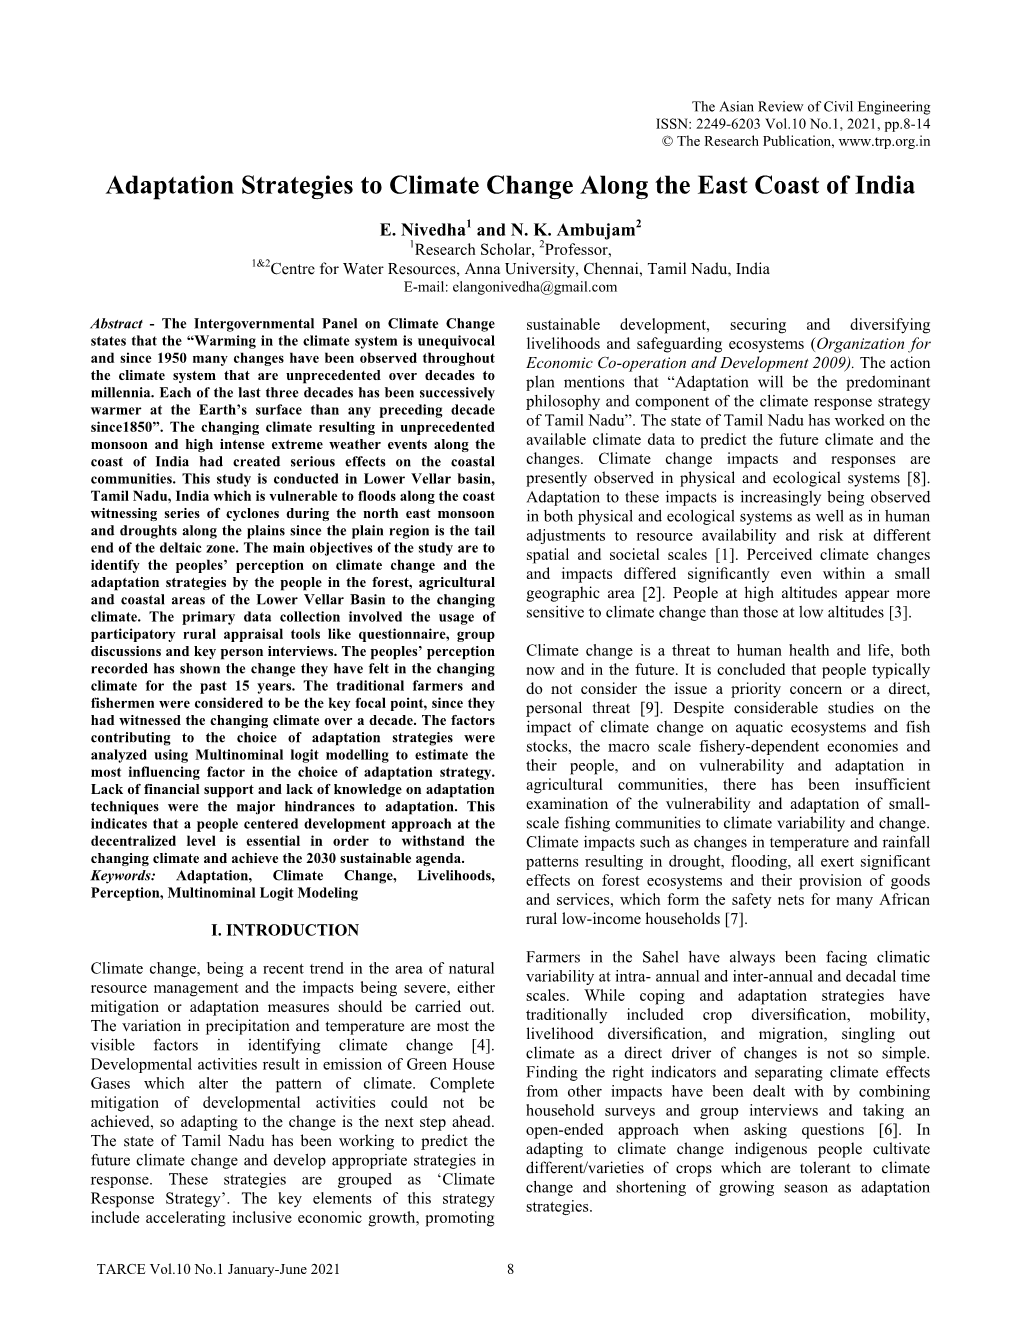 Adaptation Strategies to Climate Change Along the East Coast of India